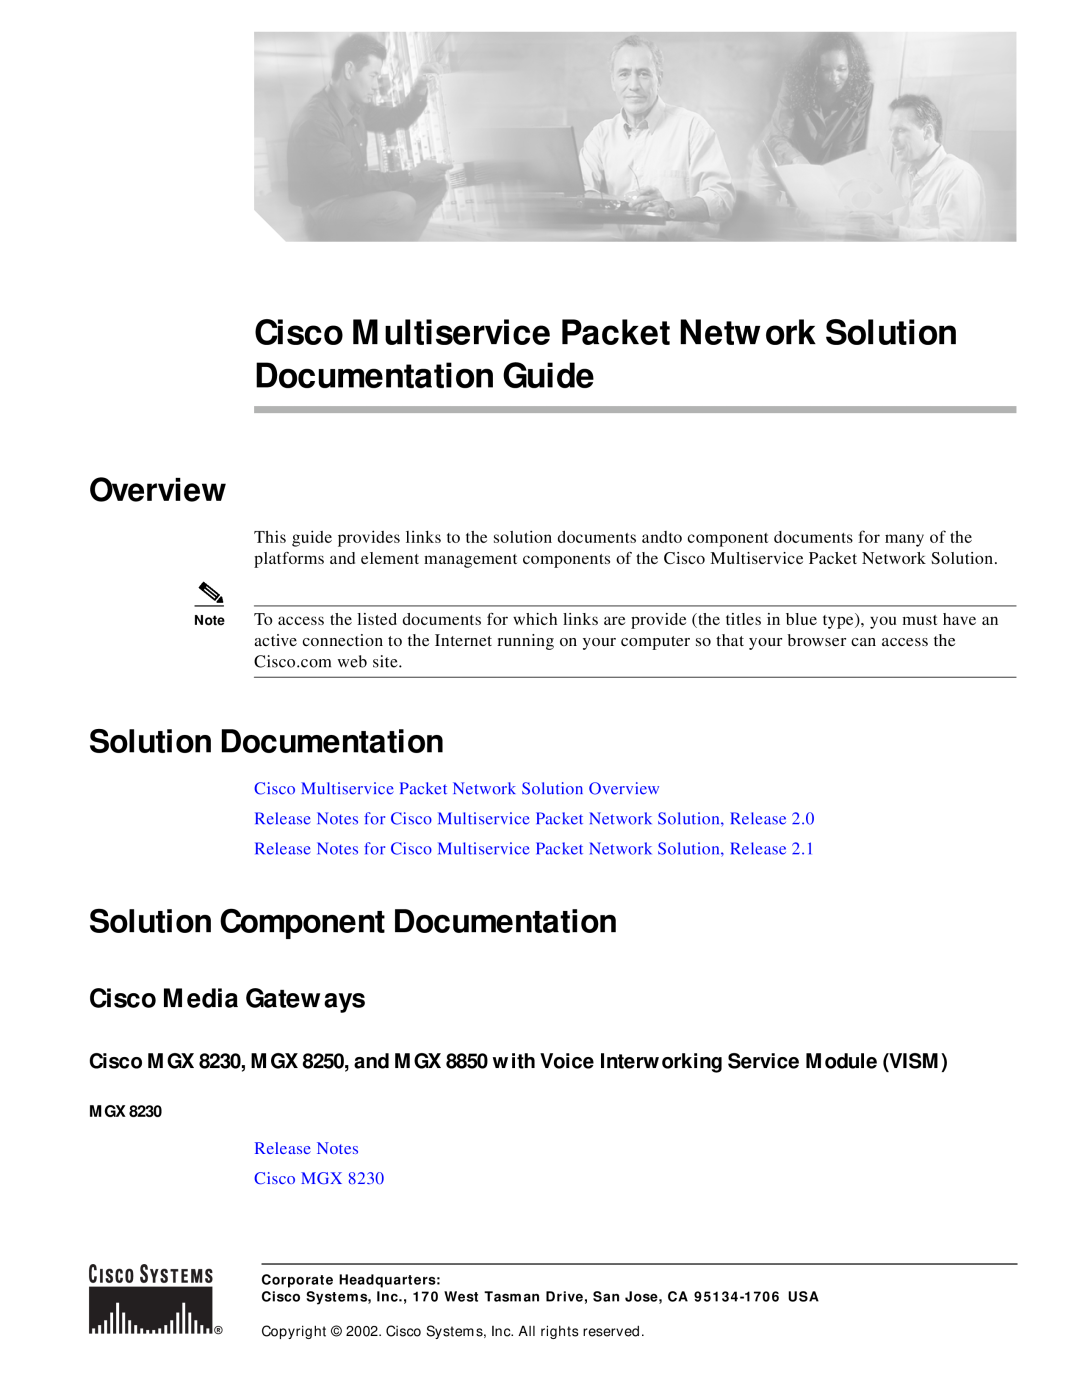 Cisco Systems OL-3026-01 manual Overview, Solution Documentation, Solution Component Documentation, Cisco Media Gateways 